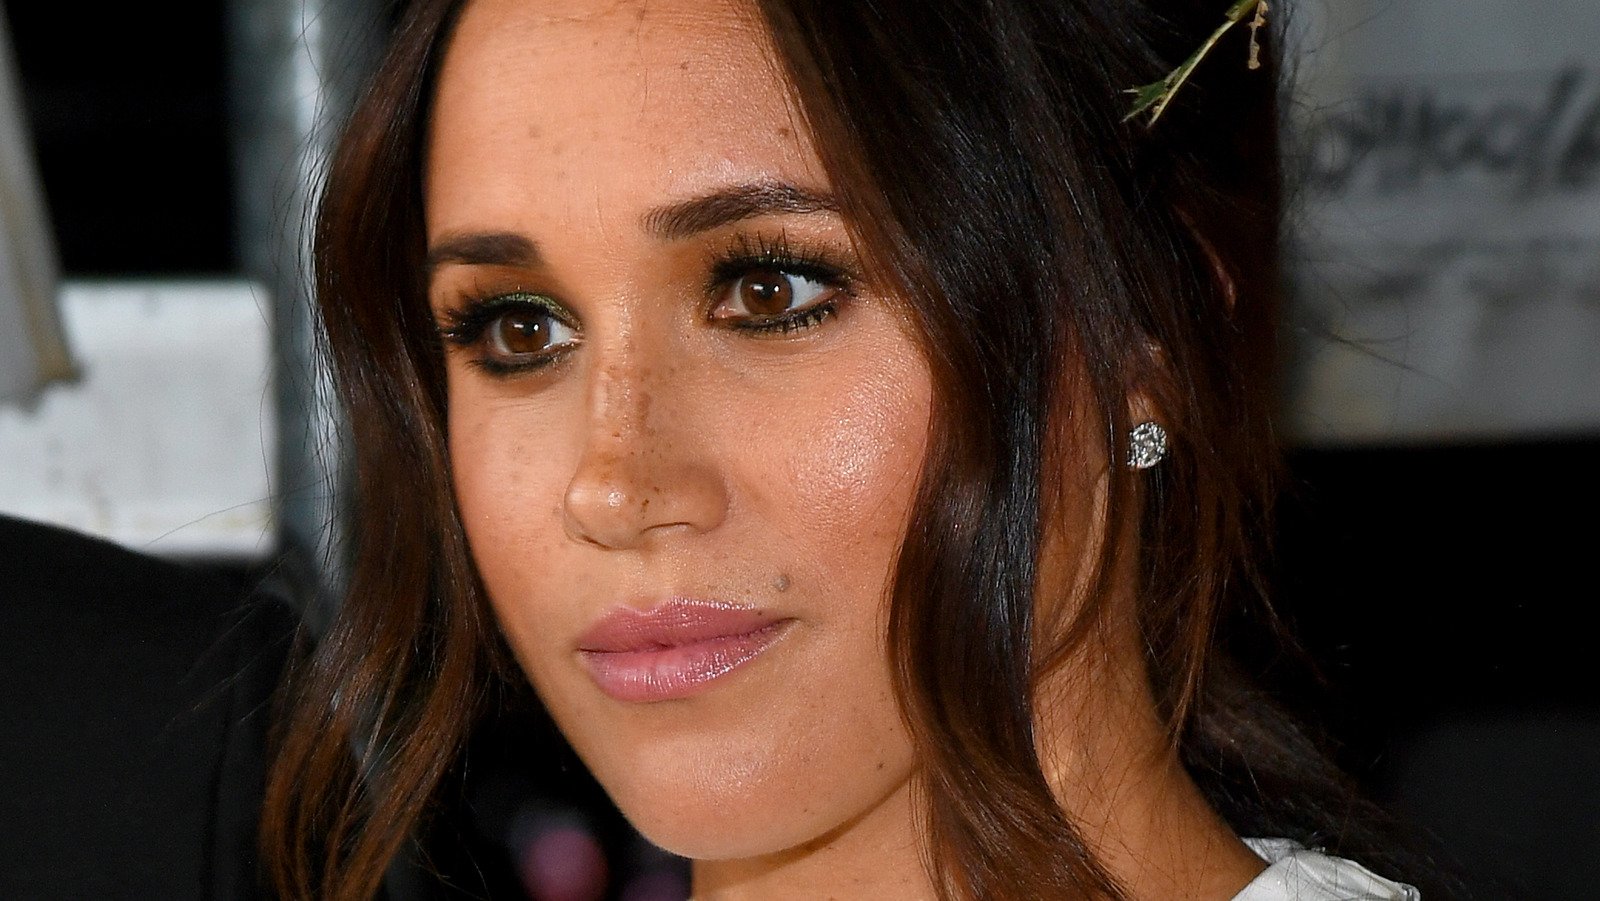 Here's What Meghan Markle Looks Like Going Makeup-Free - The List